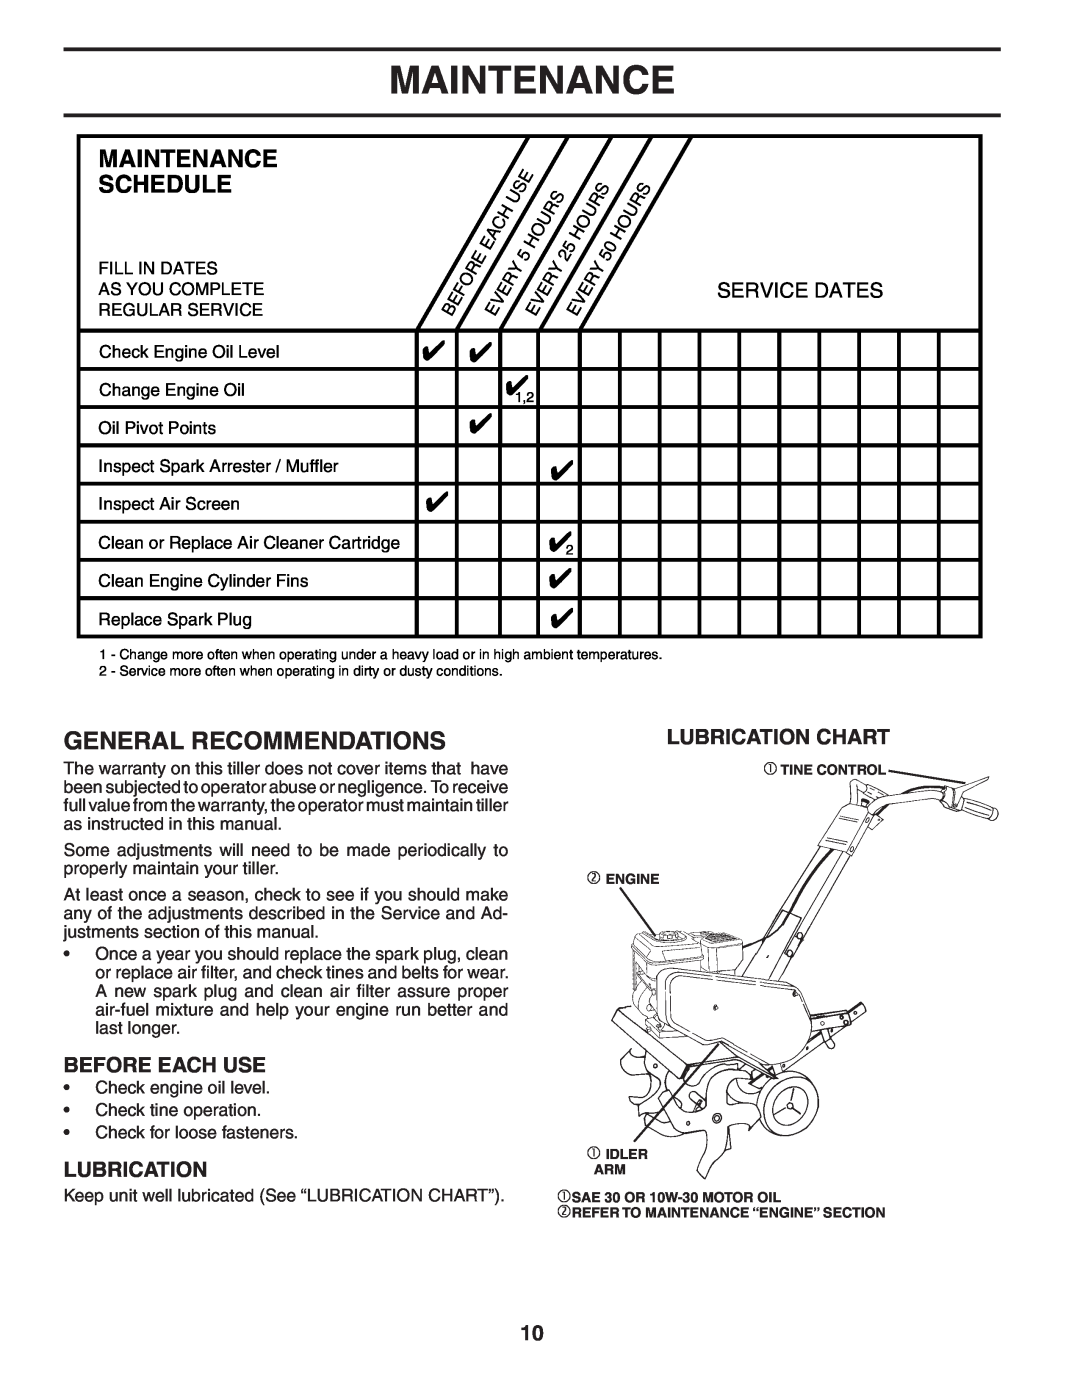 Poulan HDF550 General Recommendations, Before Each Use, Lubrication Chart, Maintenance Schedule, Service Dates 